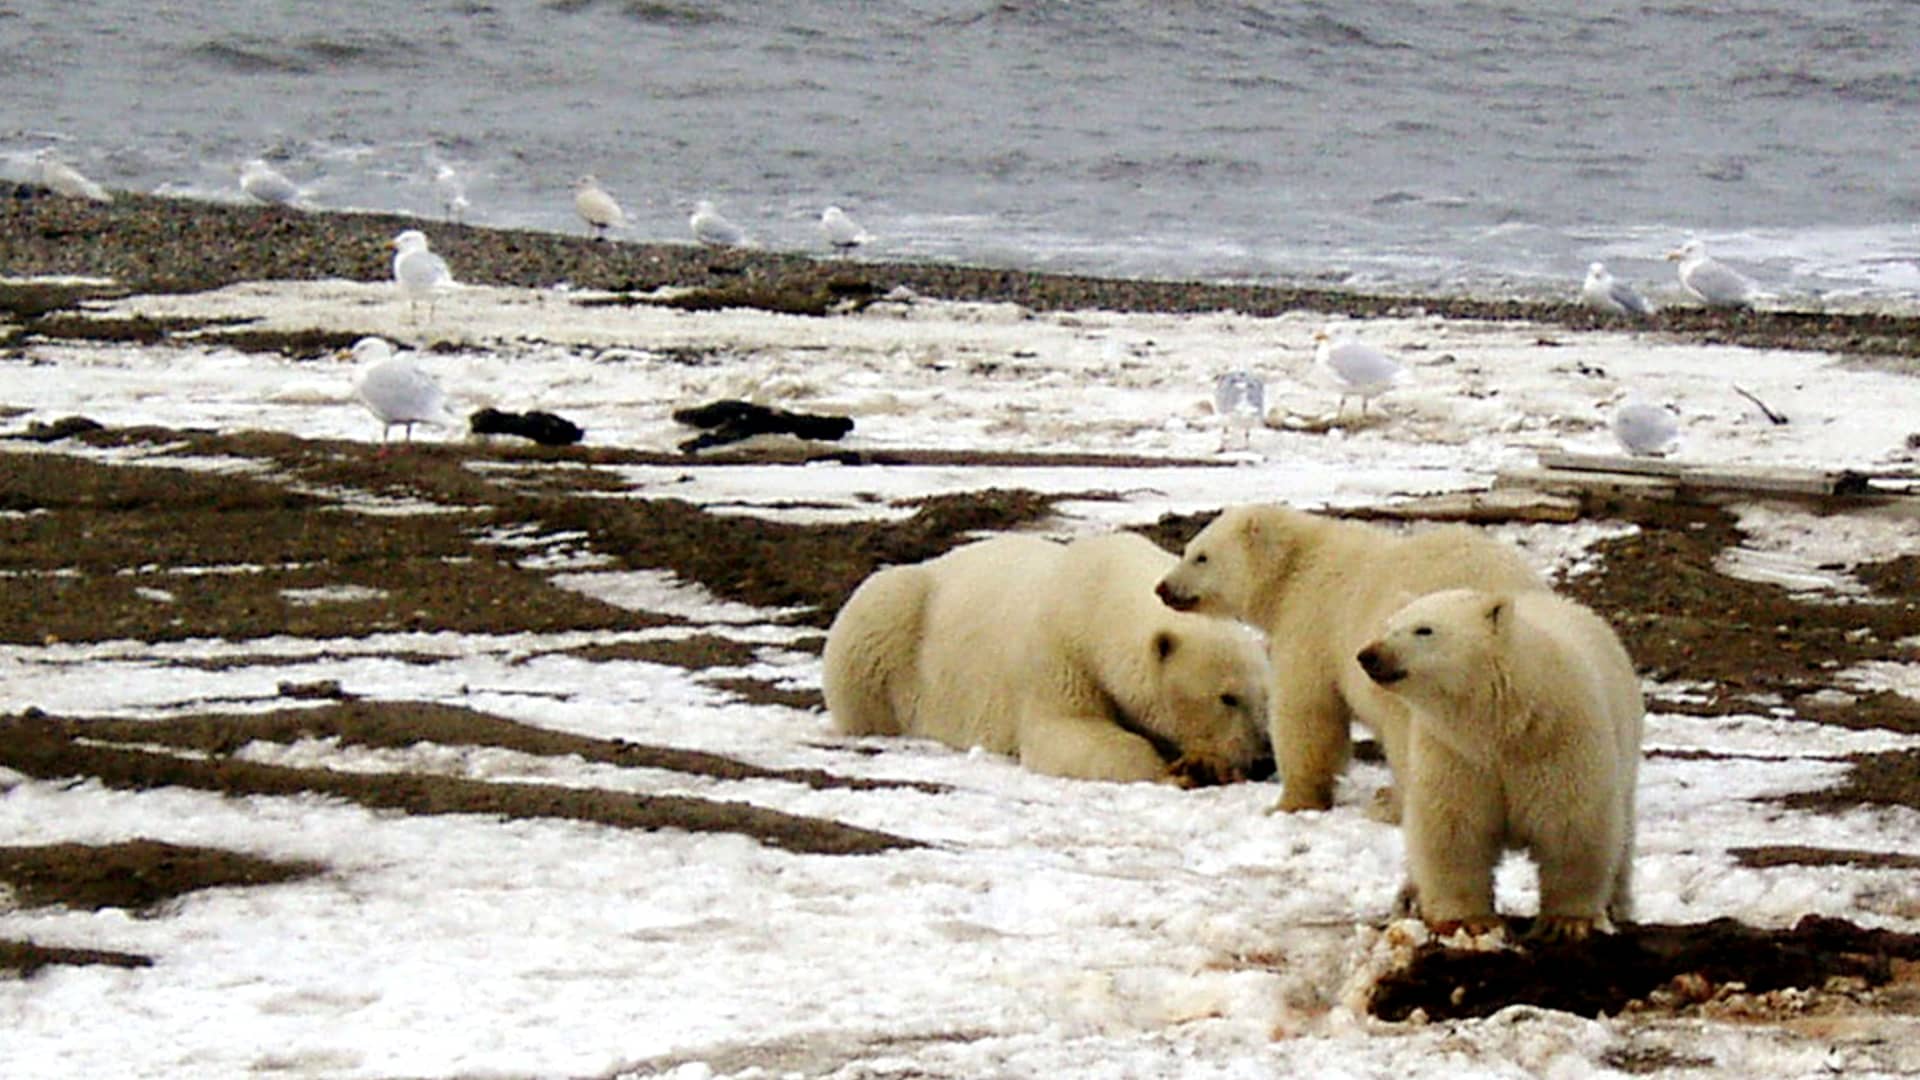 A polar bear sow and two cubs are seen on the Beaufort Sea coast within the 1002 Area of the Arctic National Wildlife Refuge.